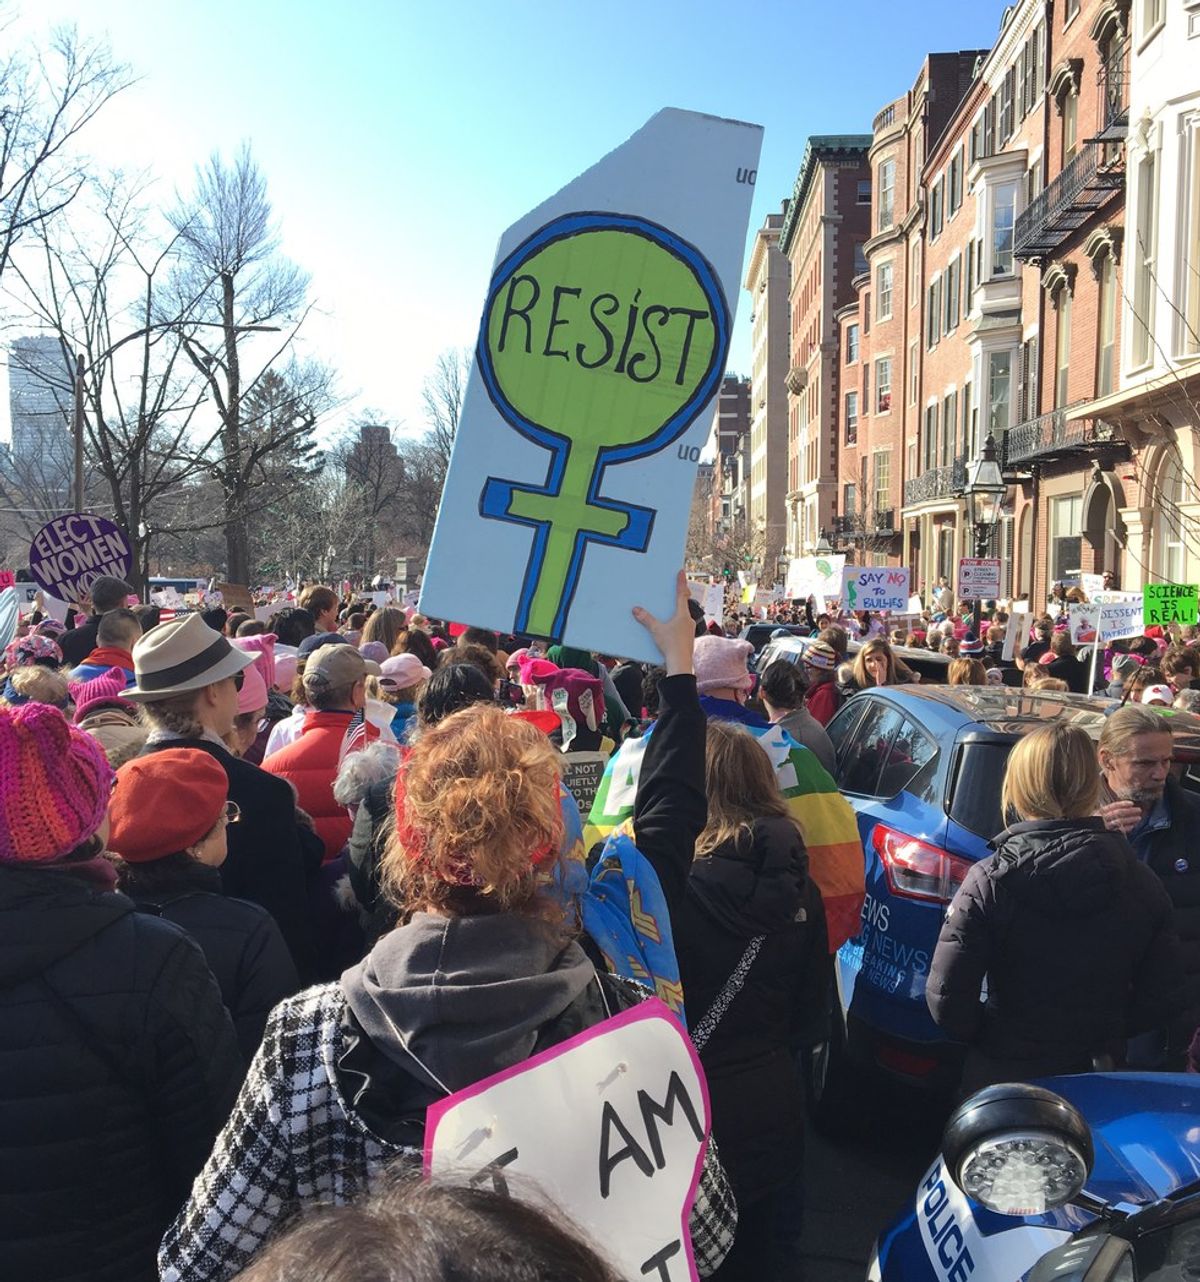 A Millennial Woman's Experience At The Boston Women's March